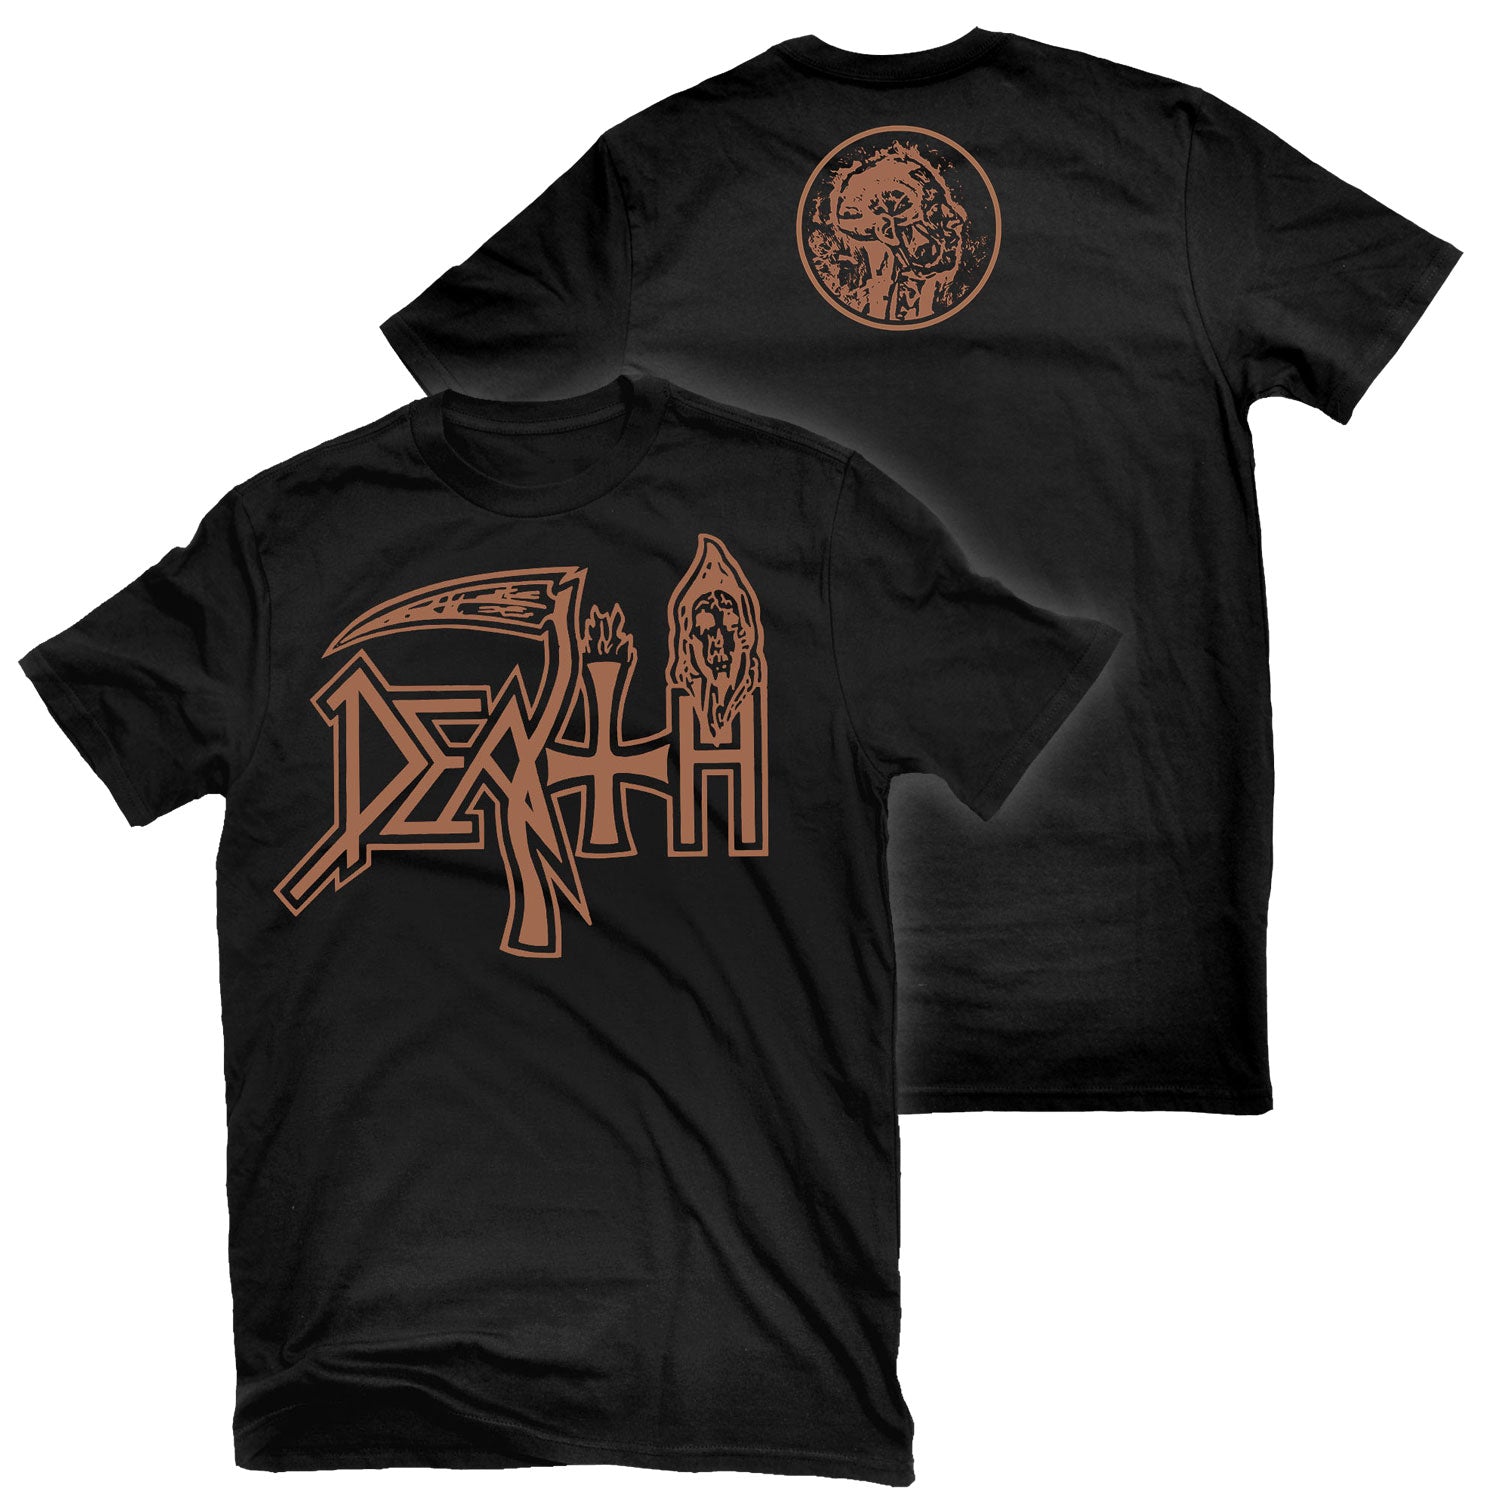 Death "On:Stage Series - Human" T-Shirt